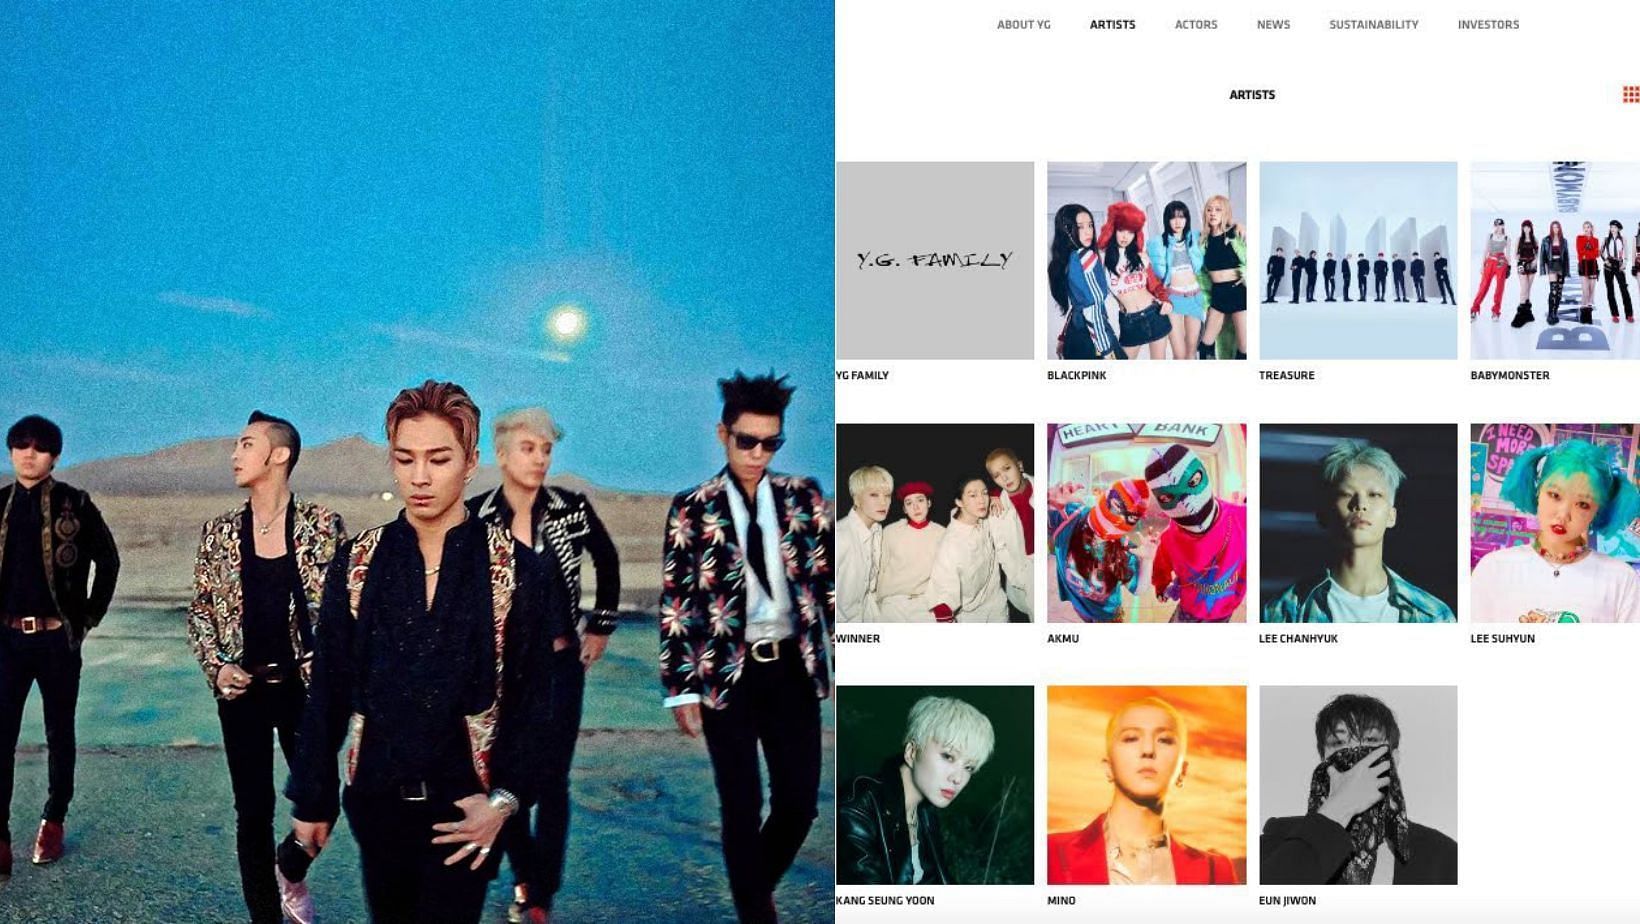 YG Entertainment allegedly removes BIGBANG from its official website following G-Dragon&rsquo;s exit. (Images via X/@kchartsmaster)